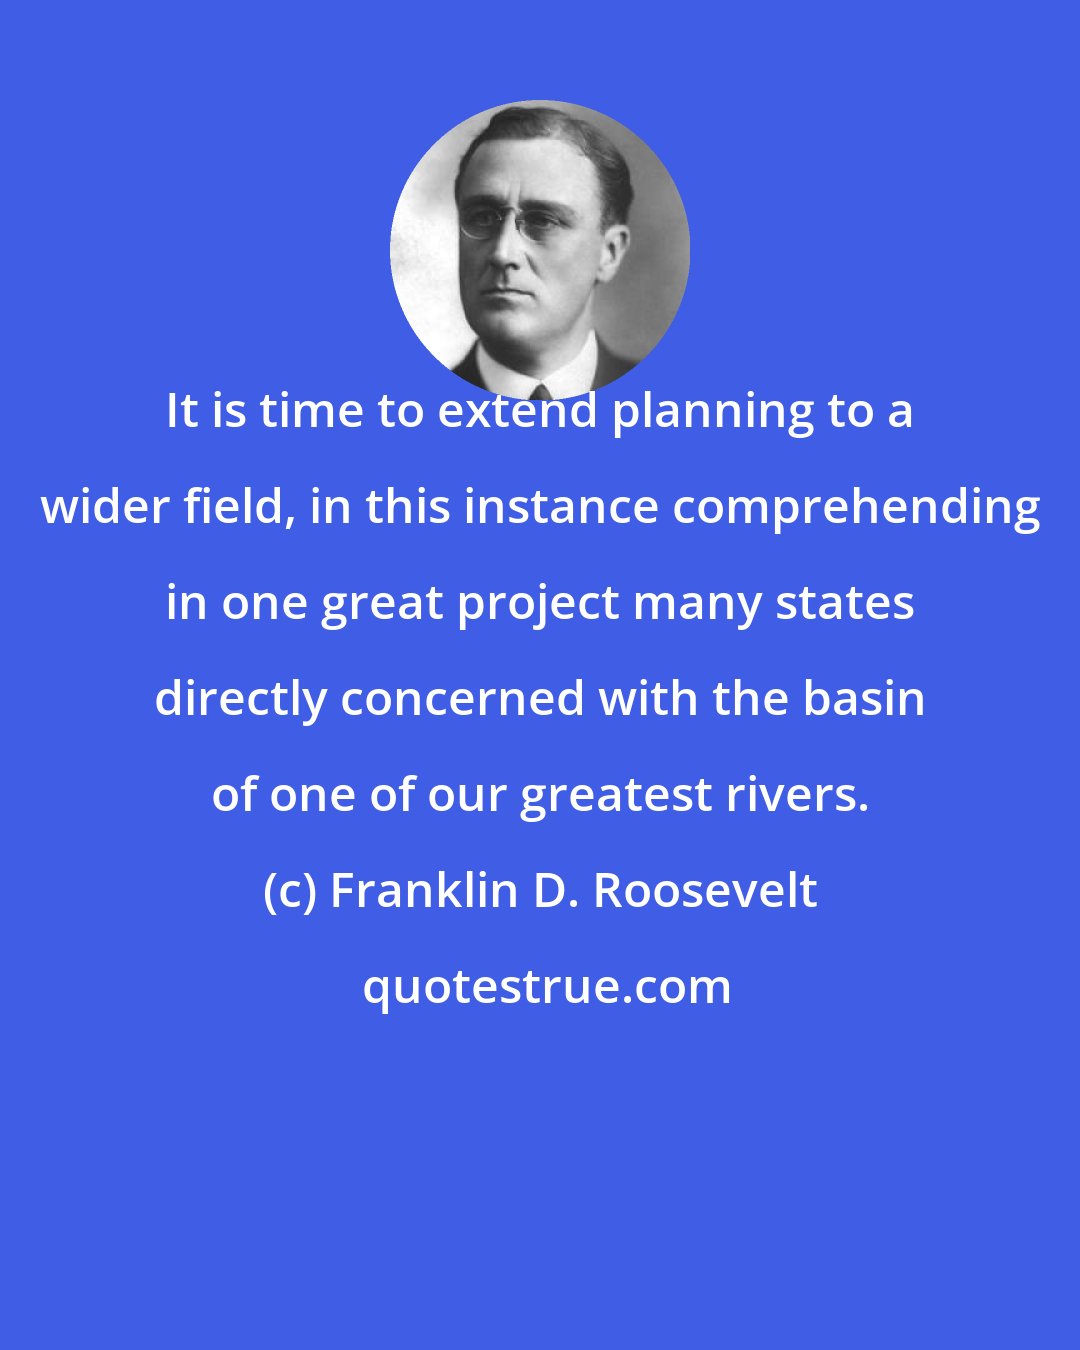 Franklin D. Roosevelt: It is time to extend planning to a wider field, in this instance comprehending in one great project many states directly concerned with the basin of one of our greatest rivers.